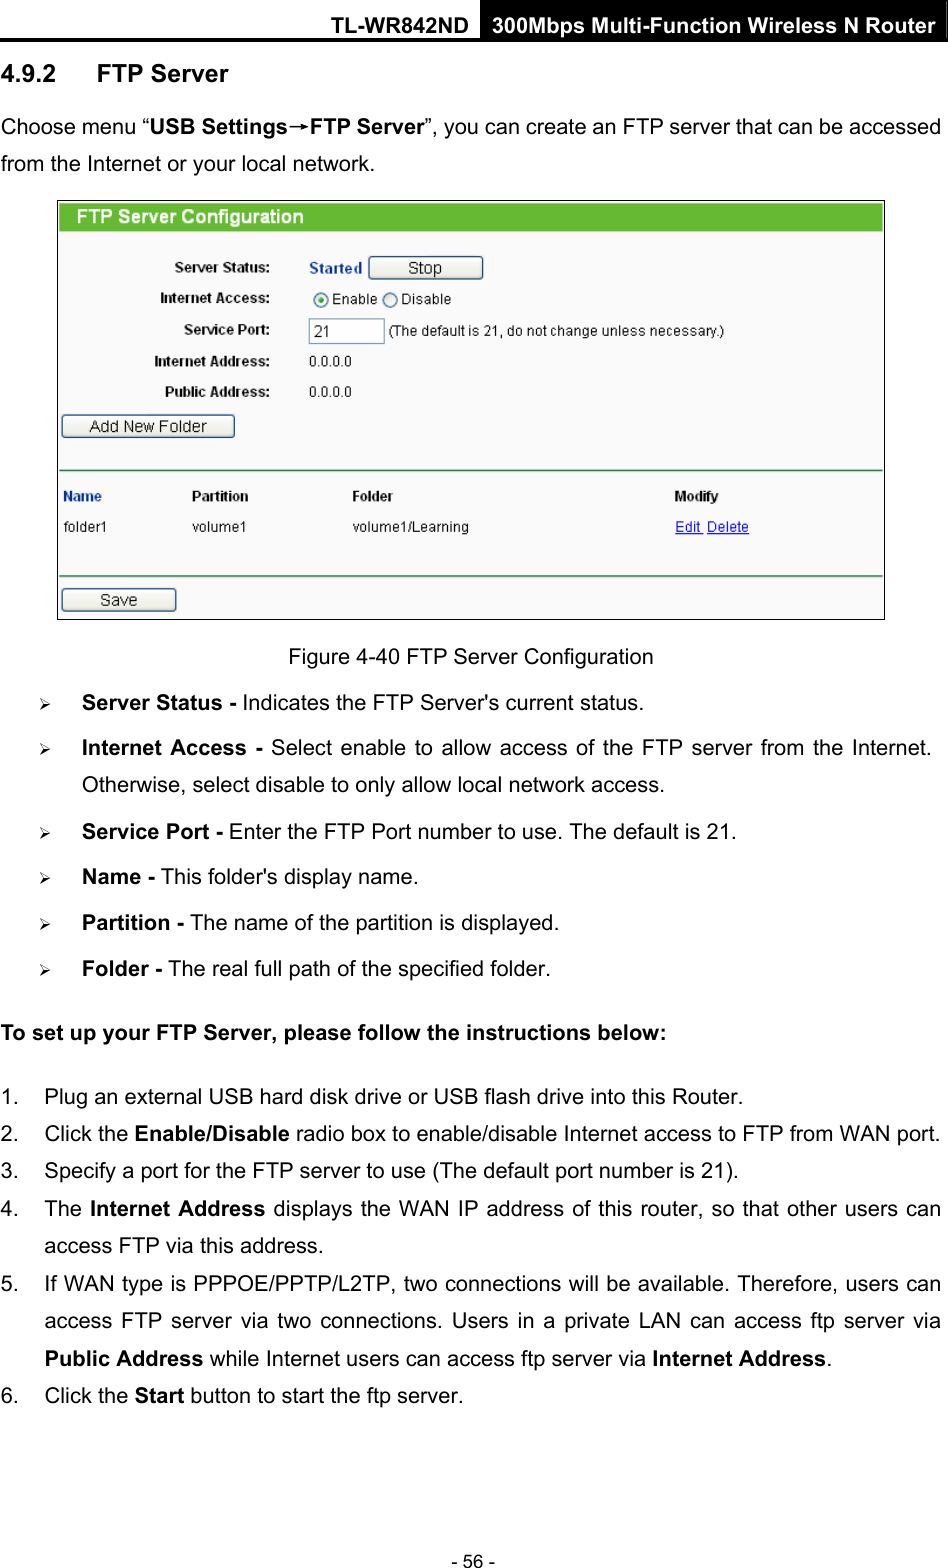 TL-WR842ND 300Mbps Multi-Function Wireless N Router - 56 - 4.9.2  FTP Server Choose menu “USB Settings→FTP Server”, you can create an FTP server that can be accessed from the Internet or your local network.    Figure 4-40 FTP Server Configuration ¾ Server Status - Indicates the FTP Server&apos;s current status.   ¾ Internet Access - Select enable to allow access of the FTP server from the Internet. Otherwise, select disable to only allow local network access.   ¾ Service Port - Enter the FTP Port number to use. The default is 21.   ¾ Name - This folder&apos;s display name. ¾ Partition - The name of the partition is displayed.   ¾ Folder - The real full path of the specified folder. To set up your FTP Server, please follow the instructions below:  1.  Plug an external USB hard disk drive or USB flash drive into this Router.   2. Click the Enable/Disable radio box to enable/disable Internet access to FTP from WAN port.   3.  Specify a port for the FTP server to use (The default port number is 21).   4. The Internet Address displays the WAN IP address of this router, so that other users can access FTP via this address.   5.  If WAN type is PPPOE/PPTP/L2TP, two connections will be available. Therefore, users can access FTP server via two connections. Users in a private LAN can access ftp server via Public Address while Internet users can access ftp server via Internet Address.  6. Click the Start button to start the ftp server.    